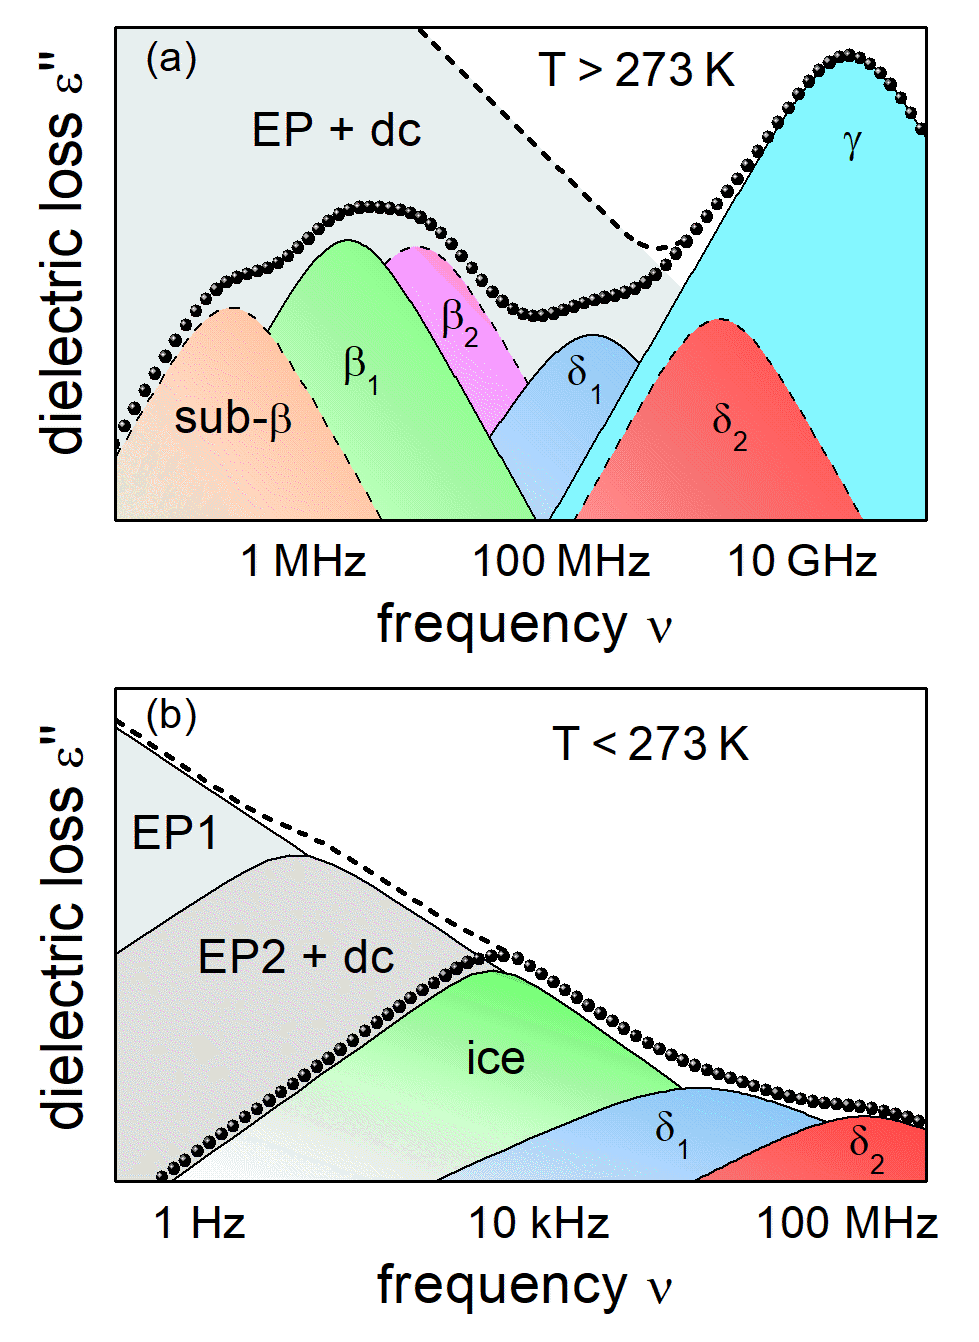 Schematic dielectric loss spectra